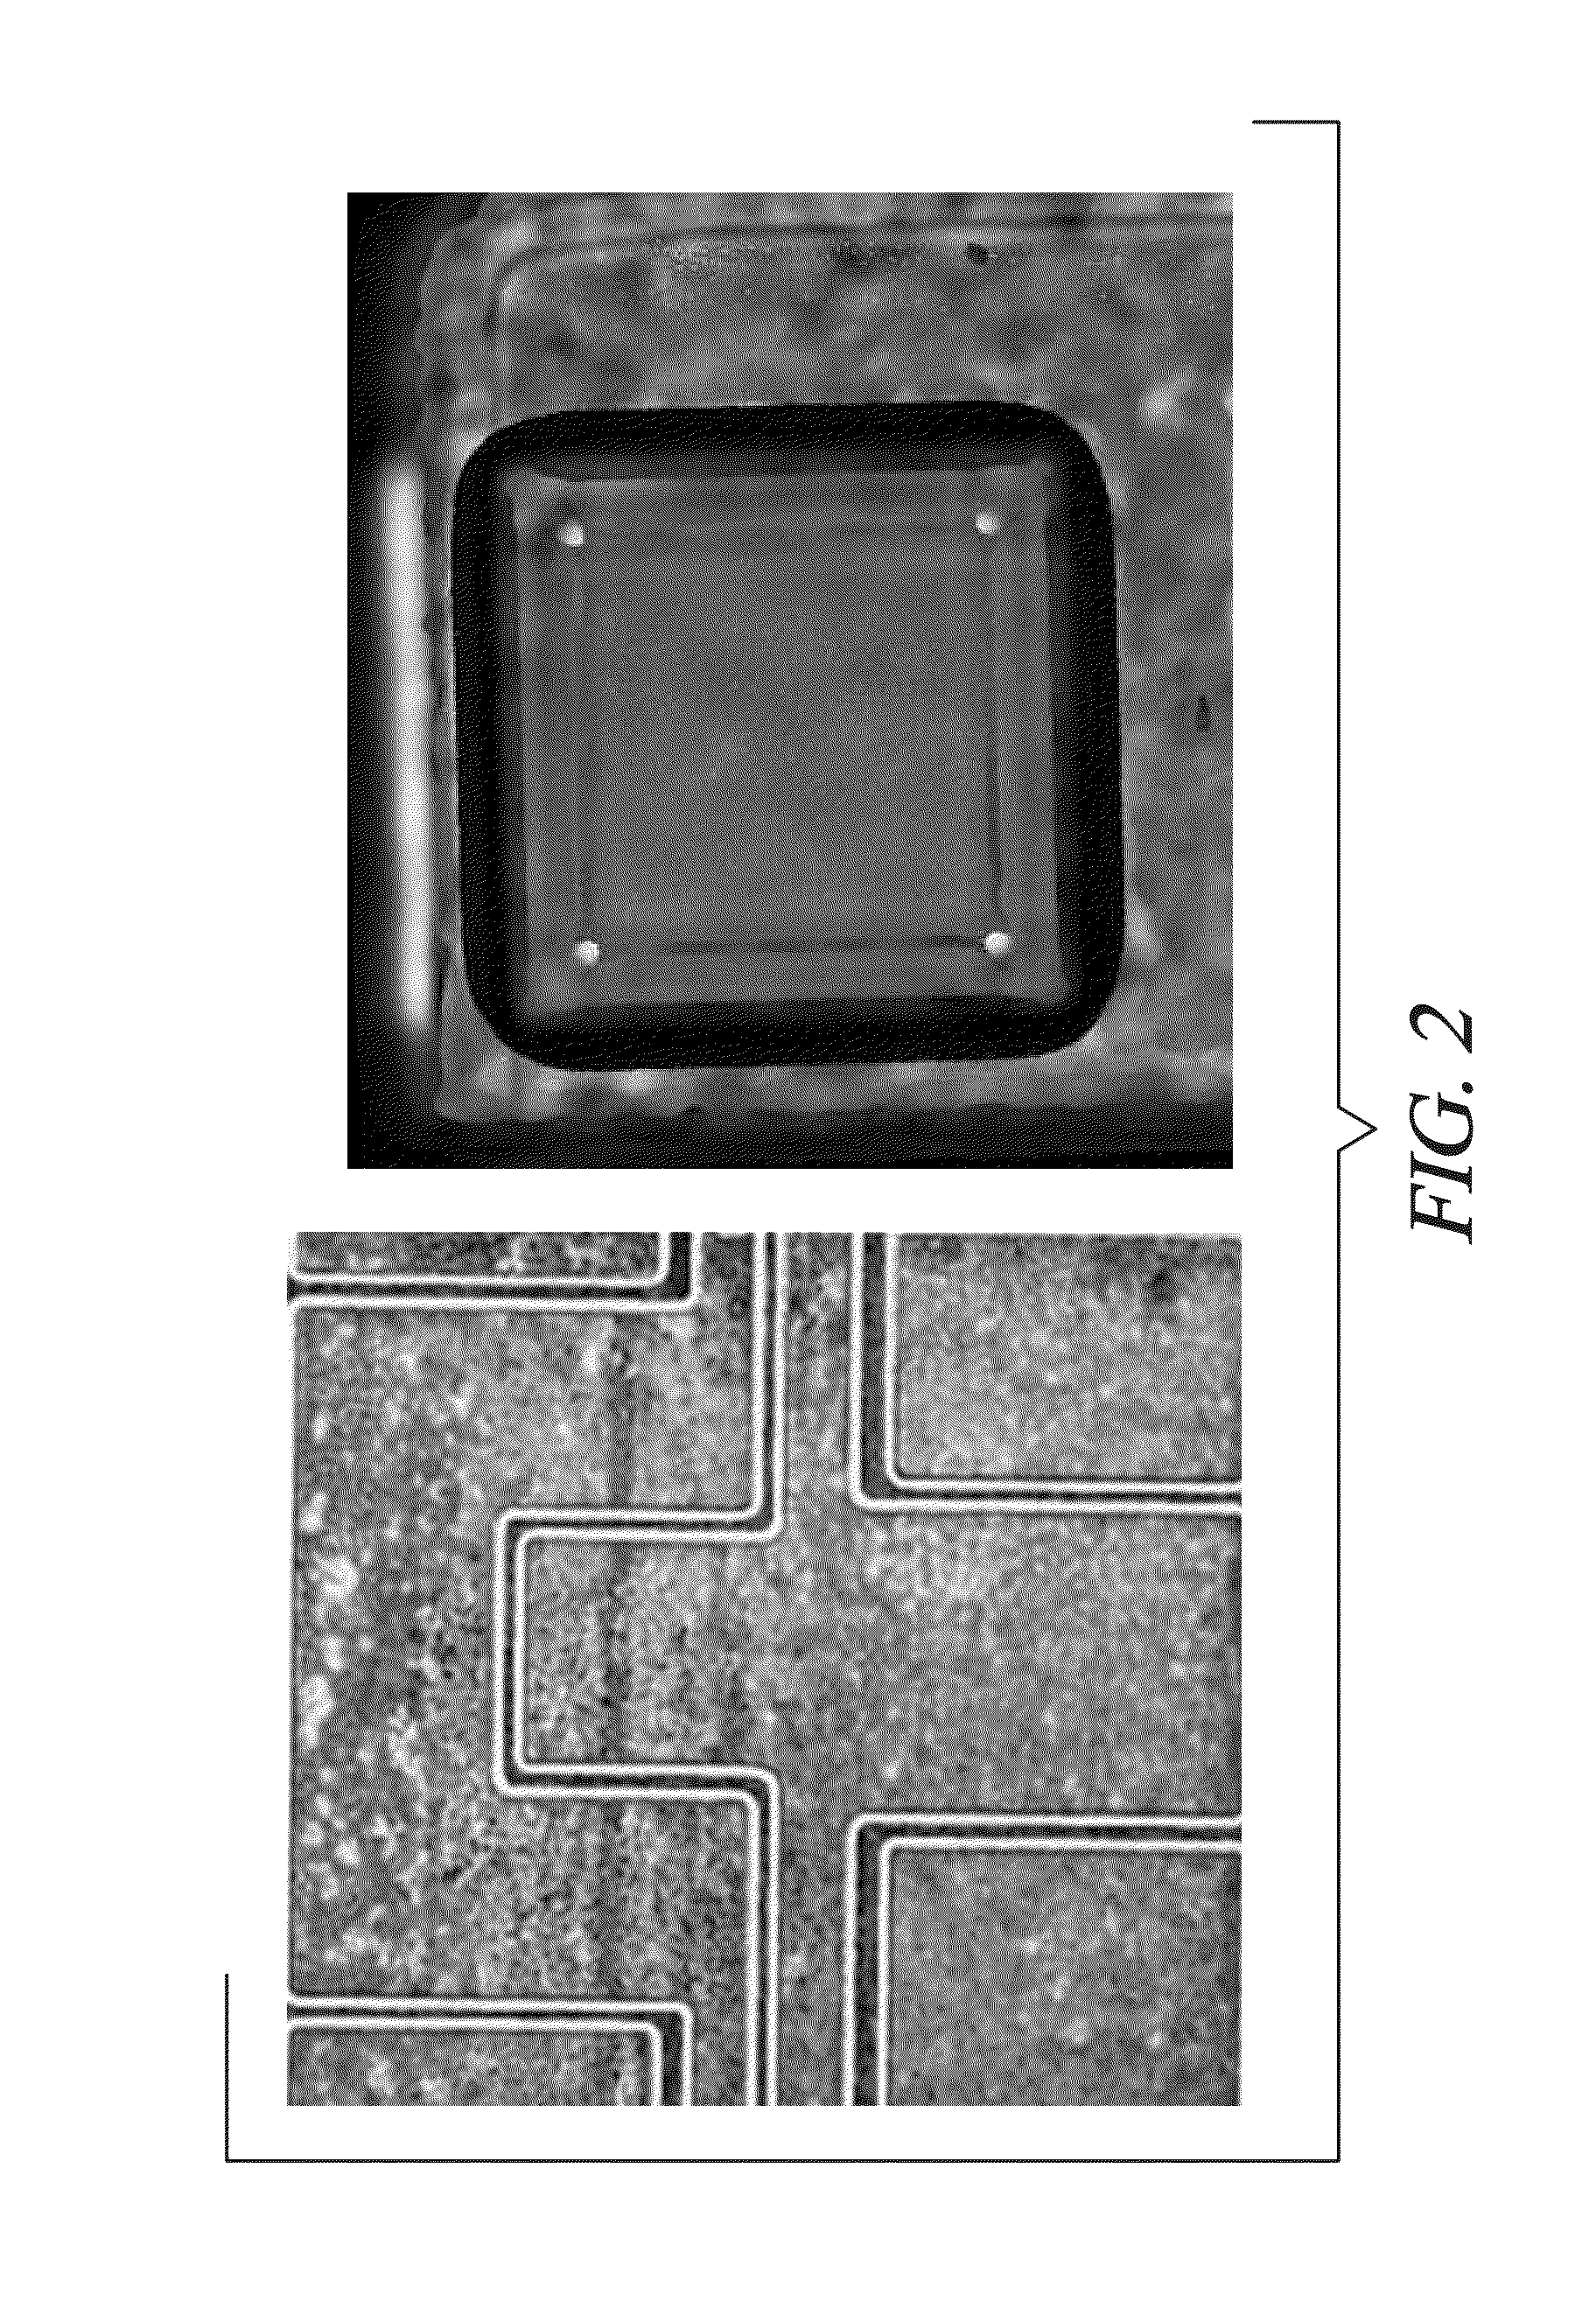 Method for reworkable packaging of high speed, low electrical parasitic power electronics modules through gate drive integration